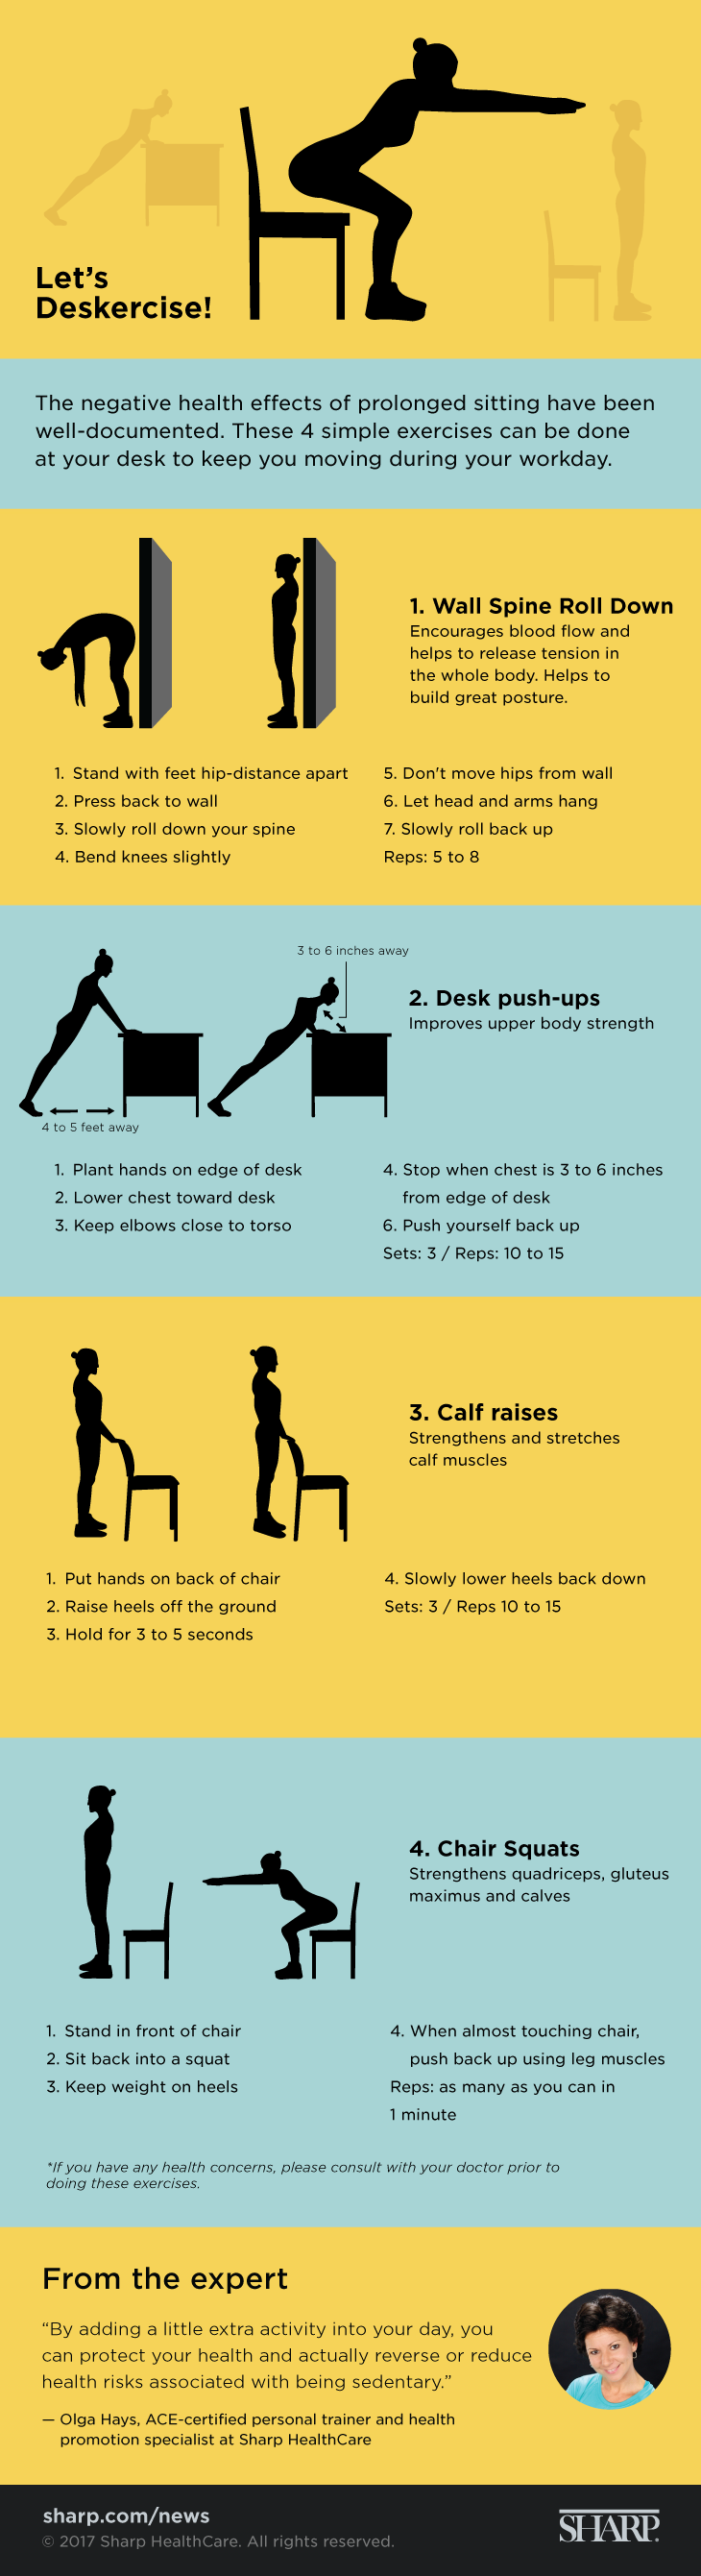 How to Overcome the Dangers of Prolonged Sitting (Even If You Work